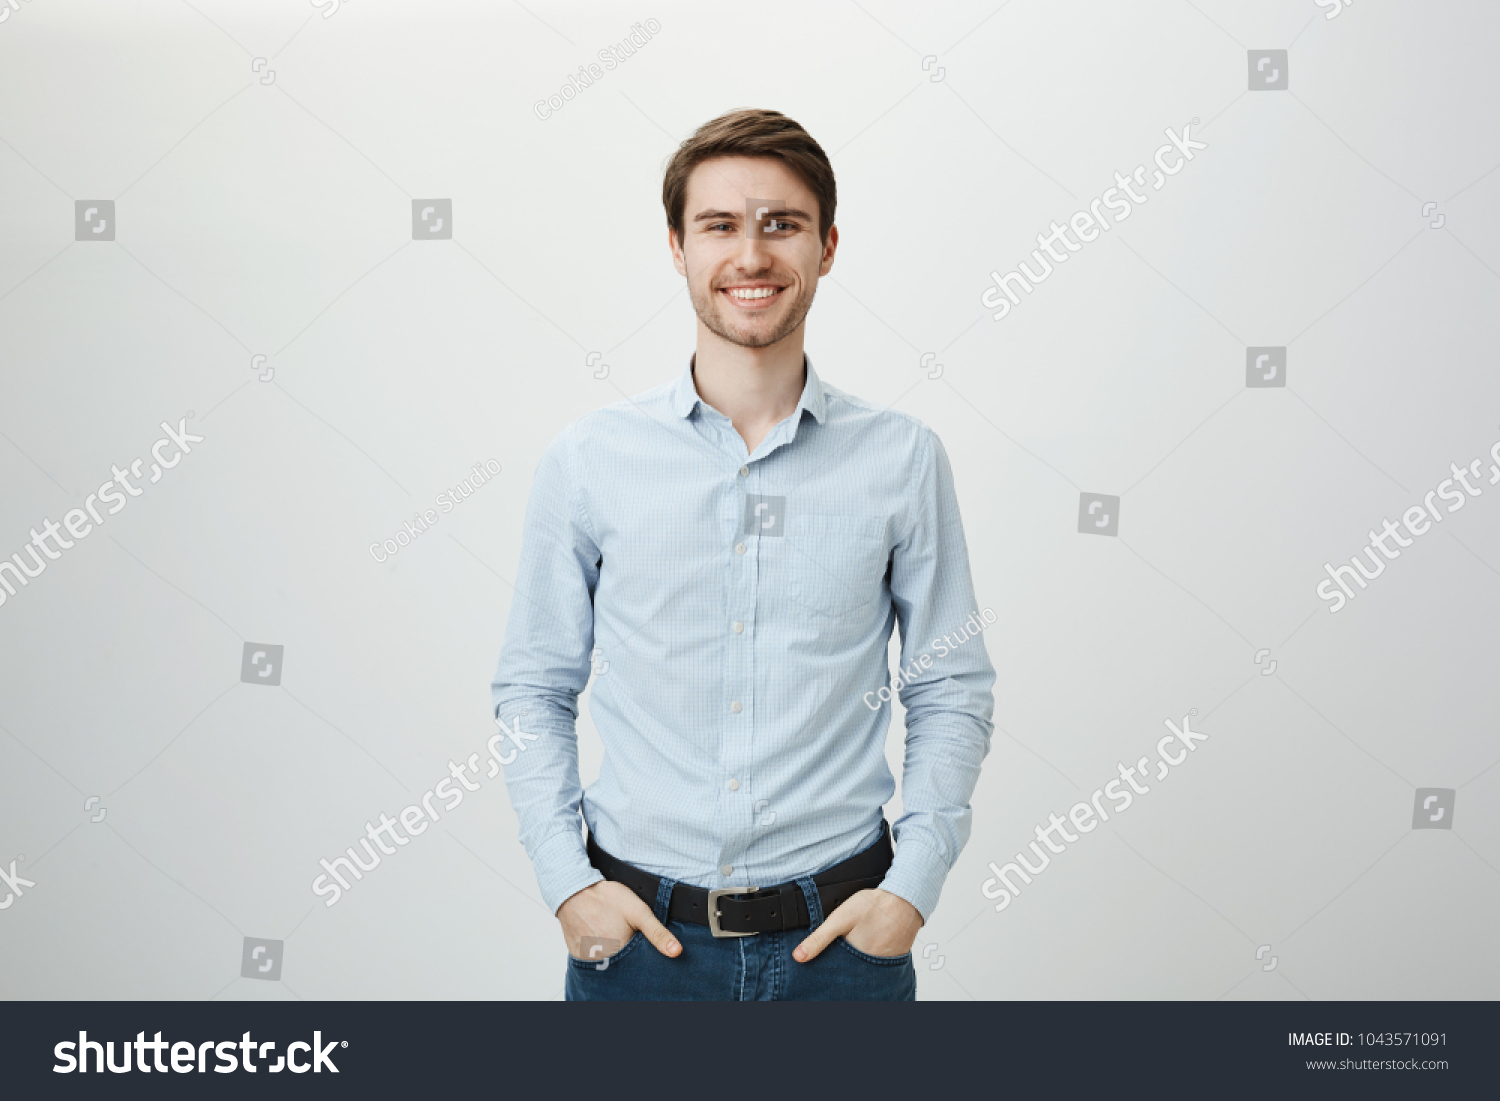 Confidence and business concept. Portrait of charming successful young entrepreneur in blue-collar shirt, smiling broadly with self-assured expression while holding hands in pockets over gray wall #1043571091